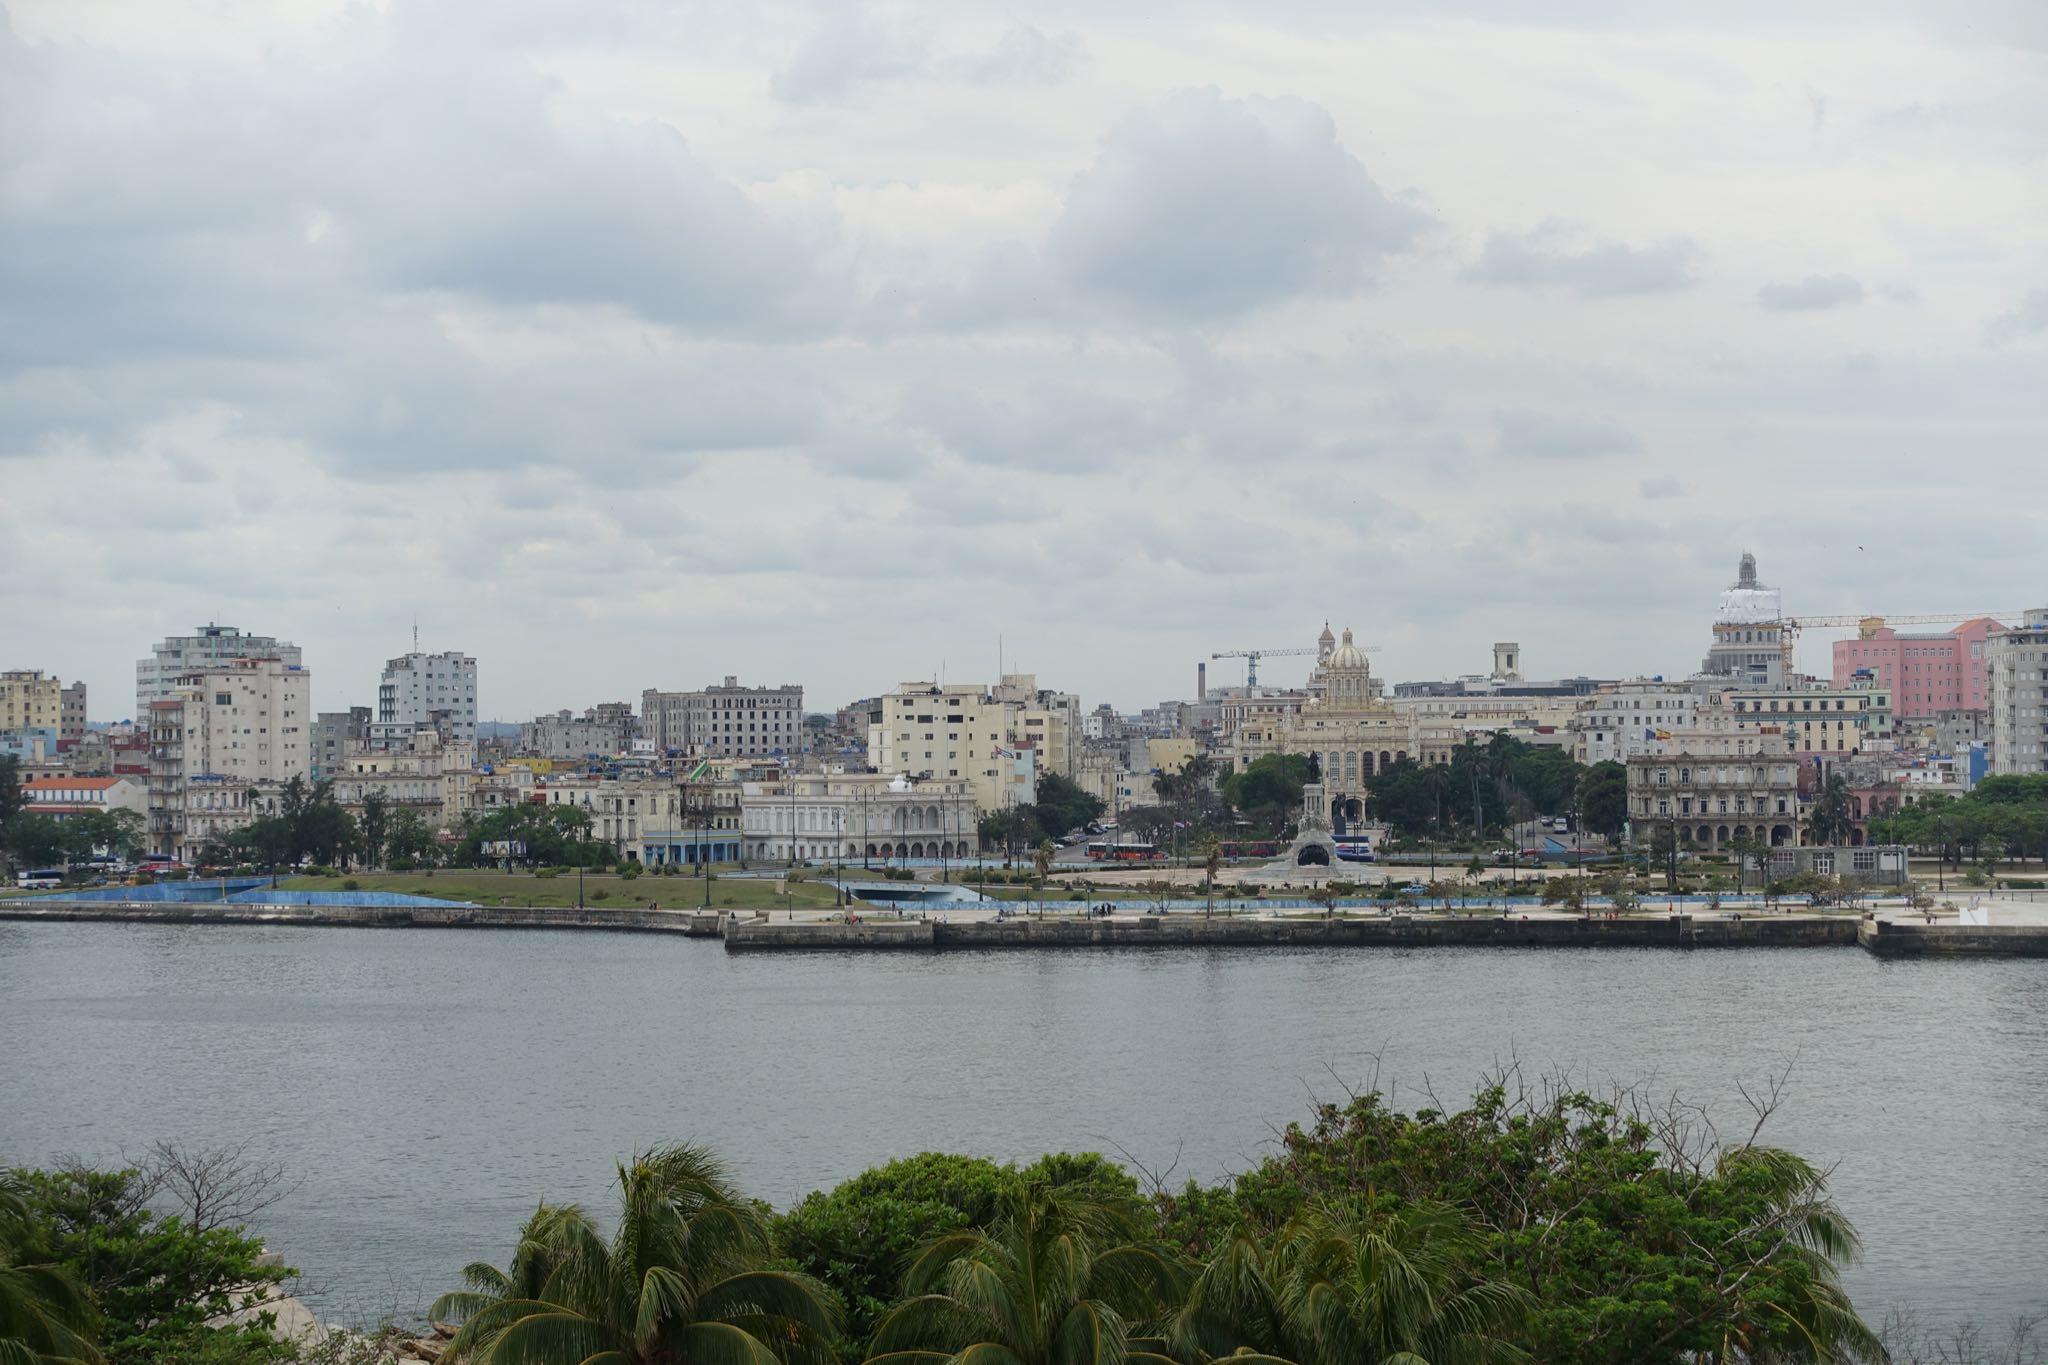 Photo 39 of 221 from the album Highlights Cuba 2019.